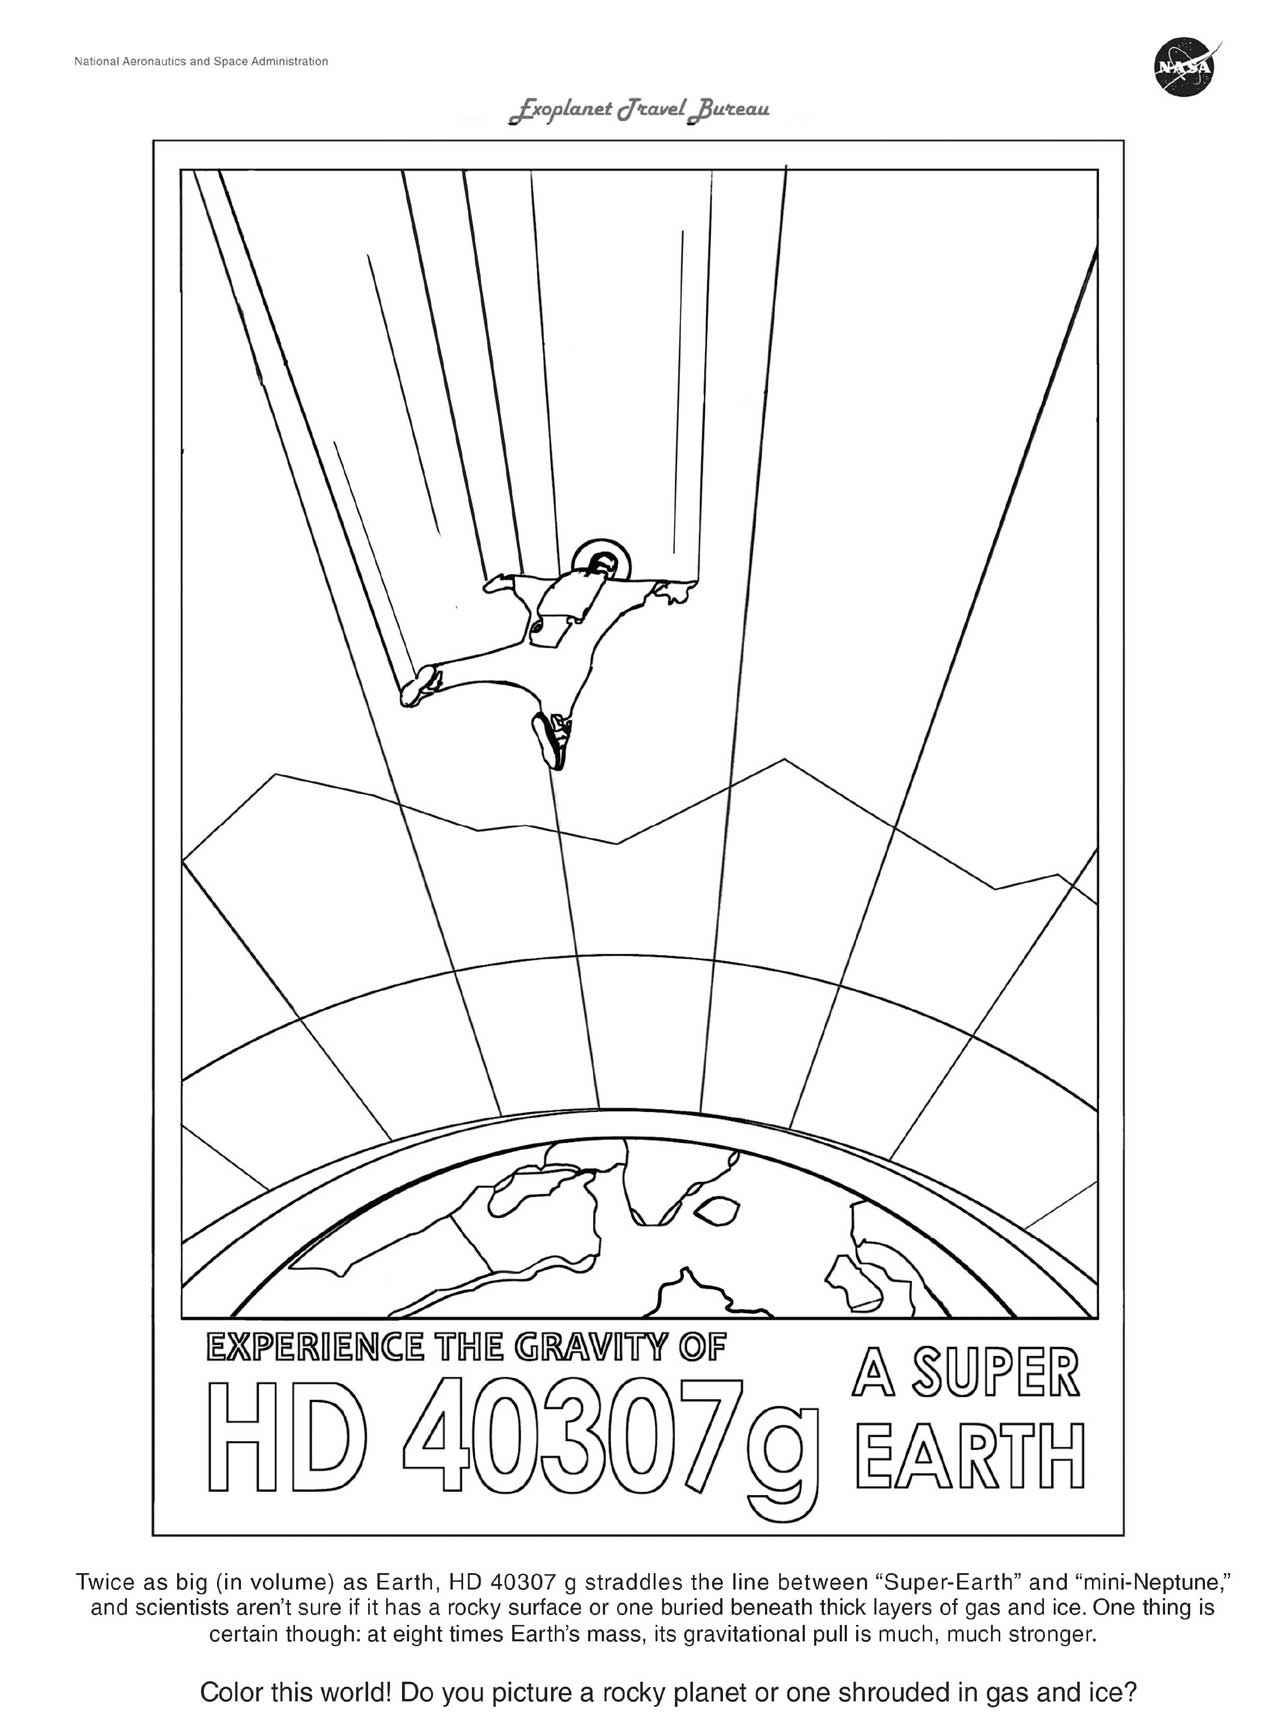 A coloring page based on our popular Exoplanet Travel Bureau poster for HD 40307 g that shows the effects of super gravity as a skydiver descends over the planet.